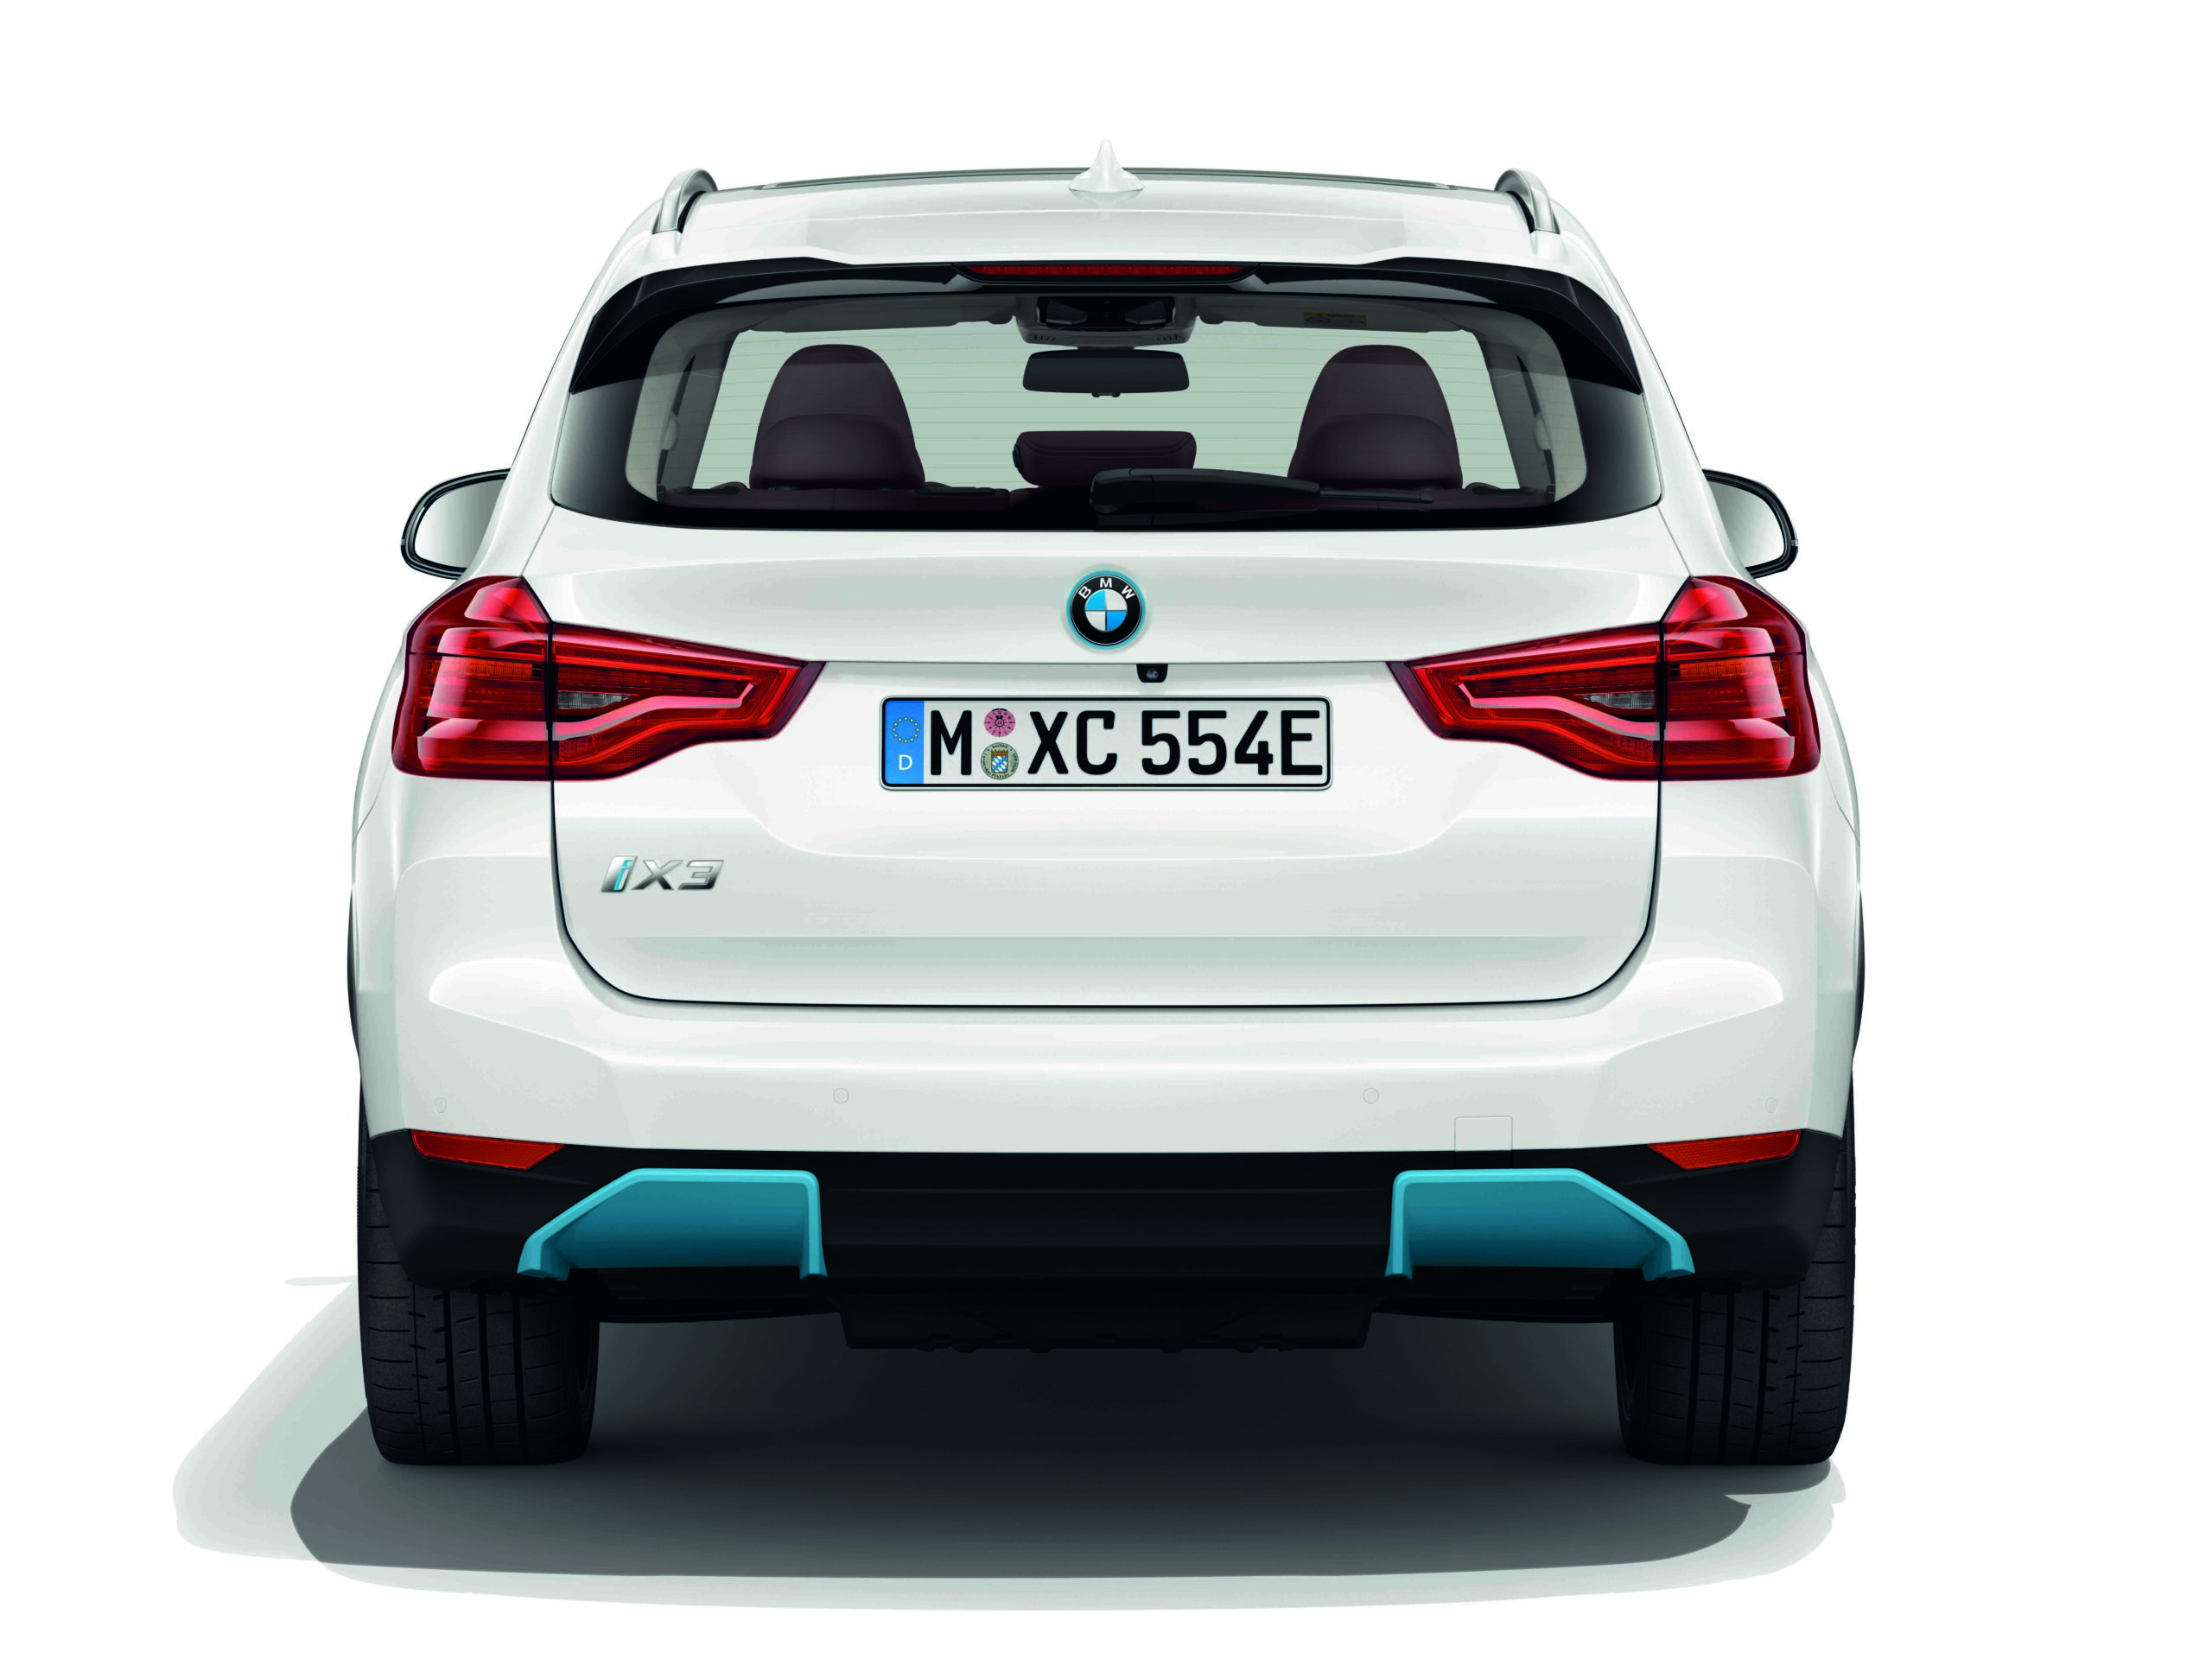 13. The First Ever BMW iX3 scaled